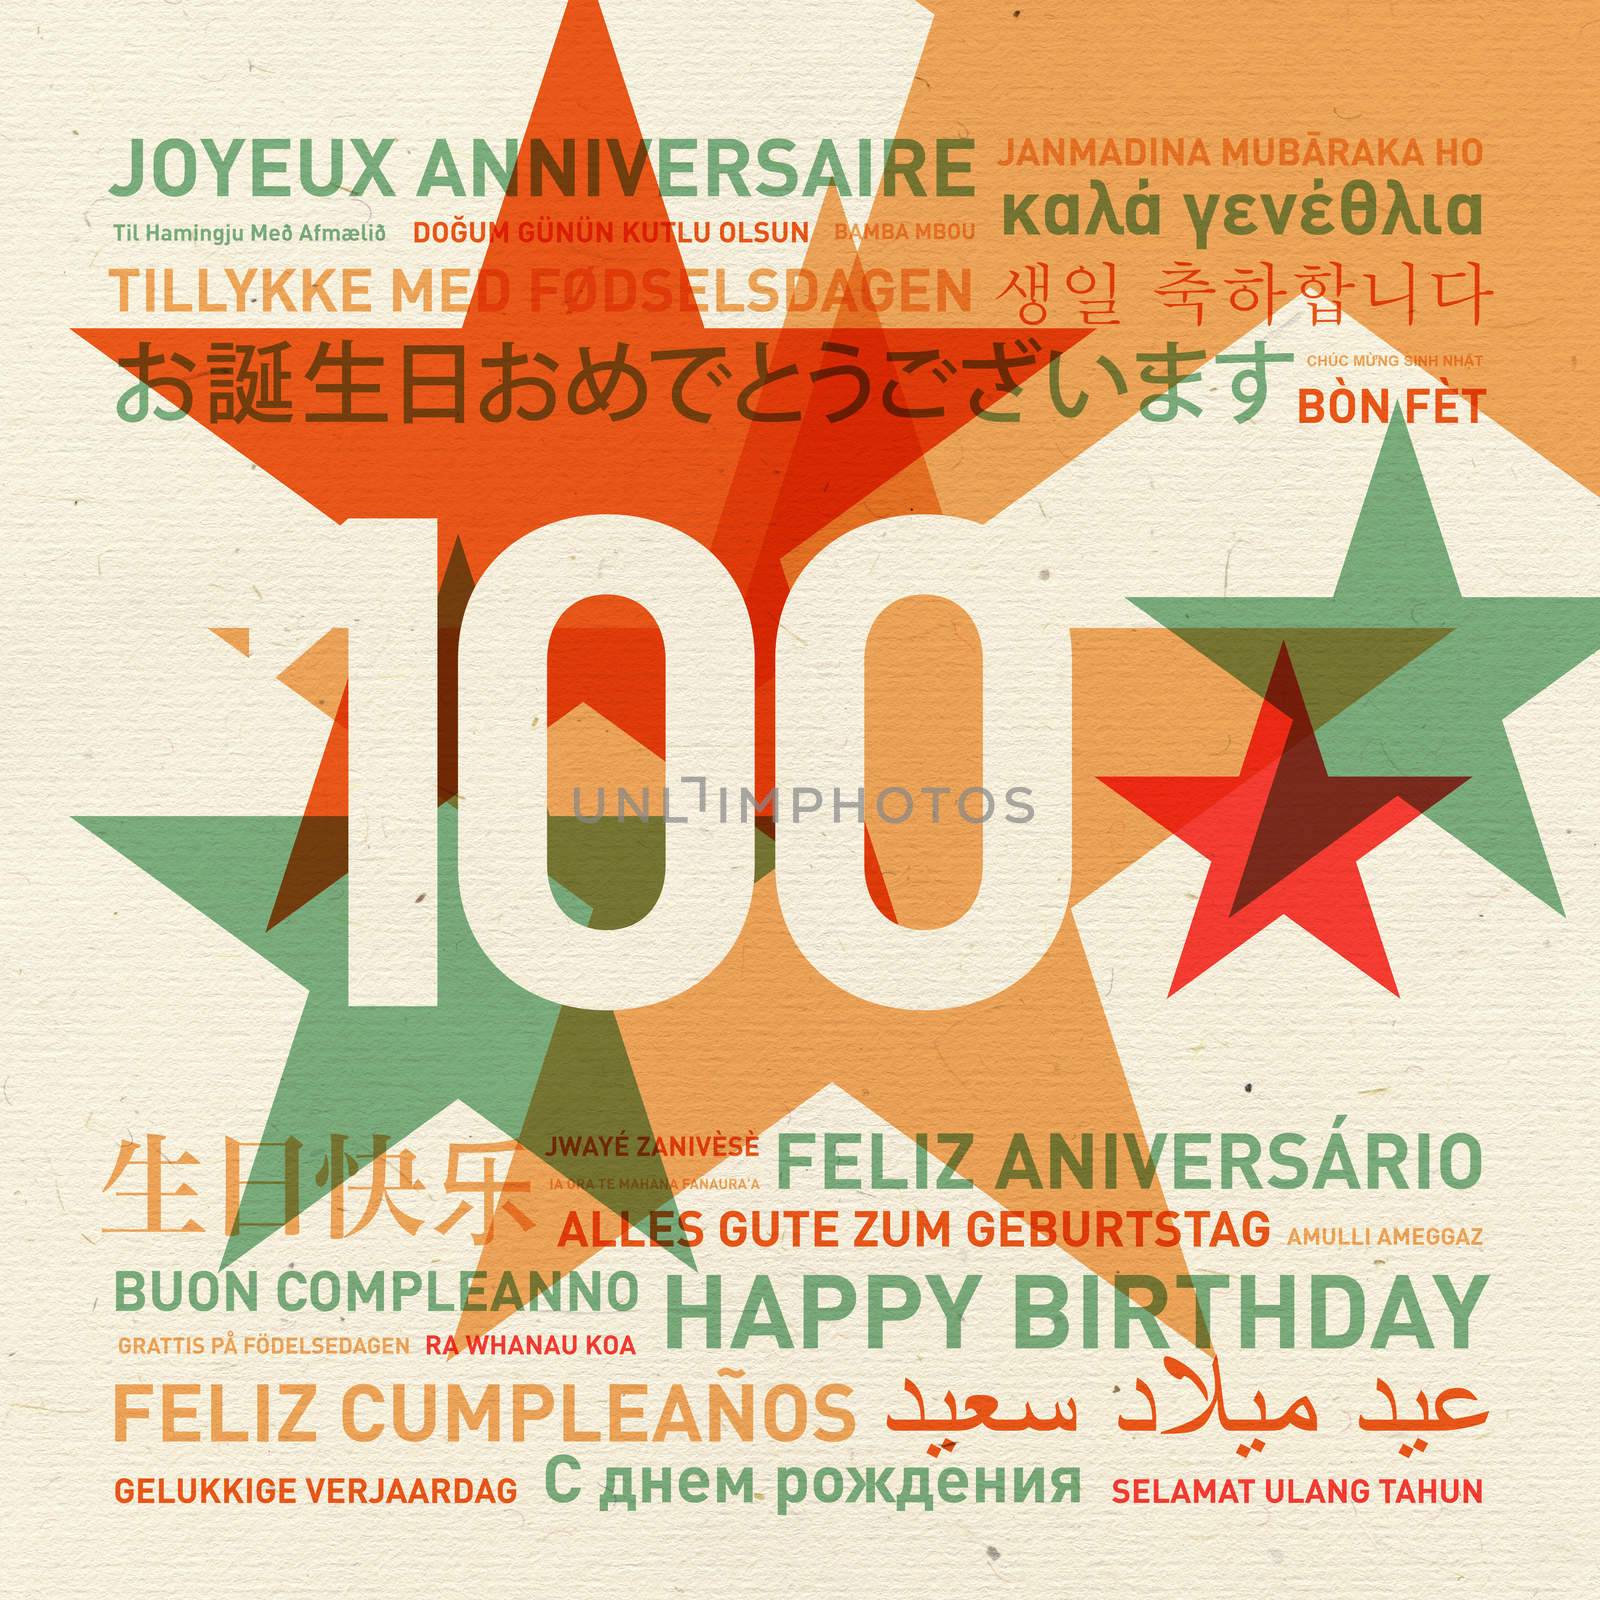 100th anniversary happy birthday from the world. Different languages celebration card